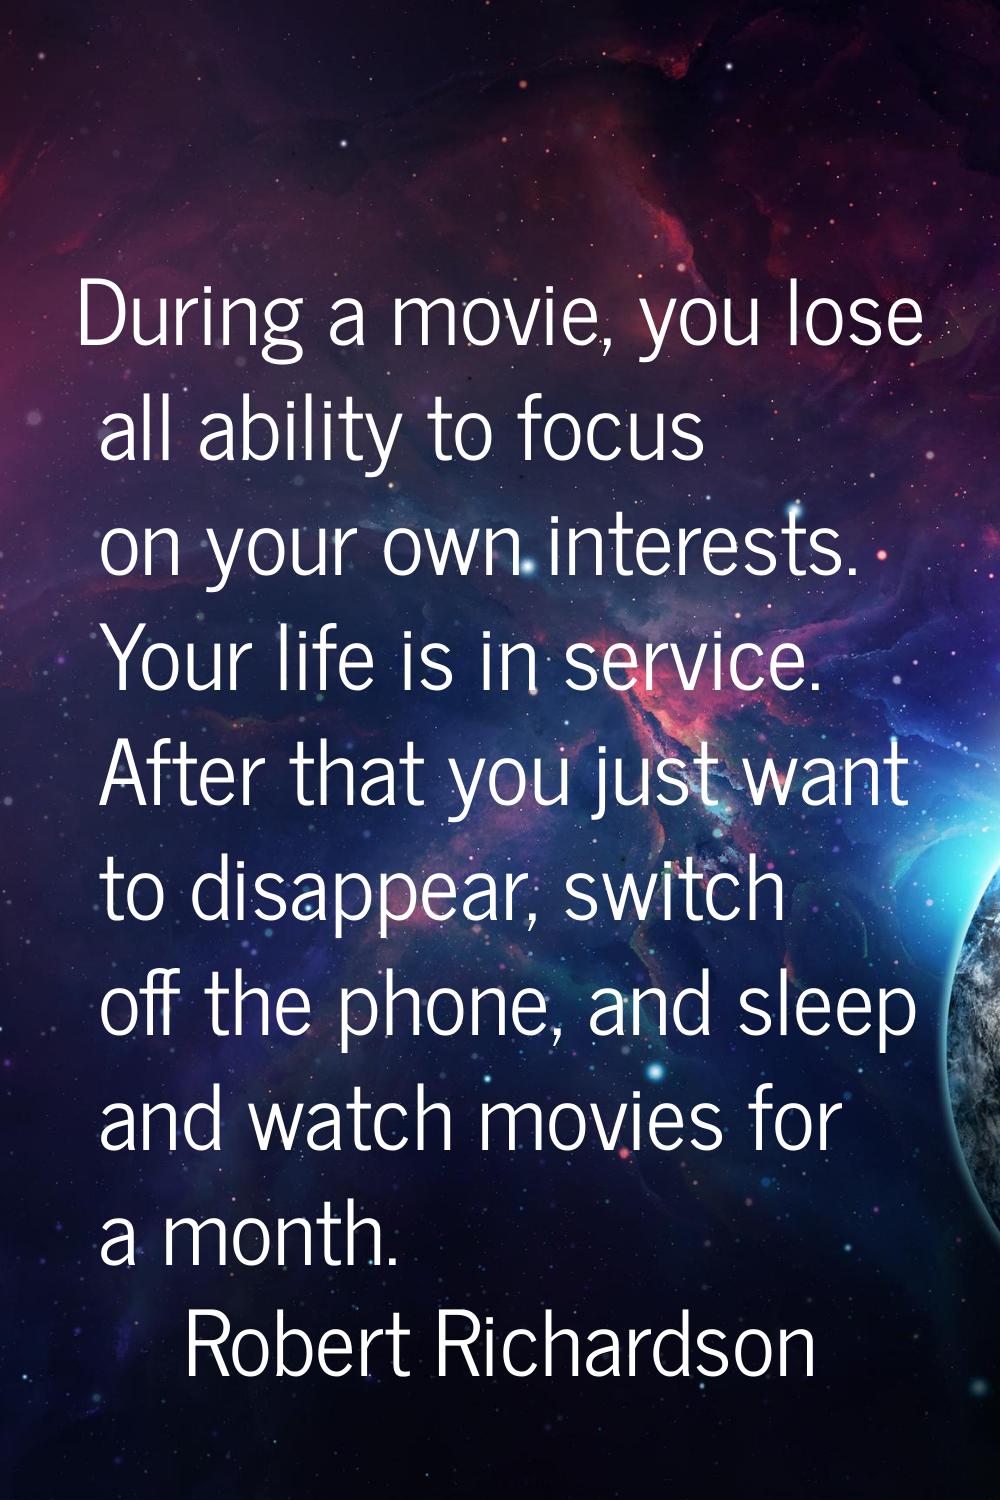 During a movie, you lose all ability to focus on your own interests. Your life is in service. After